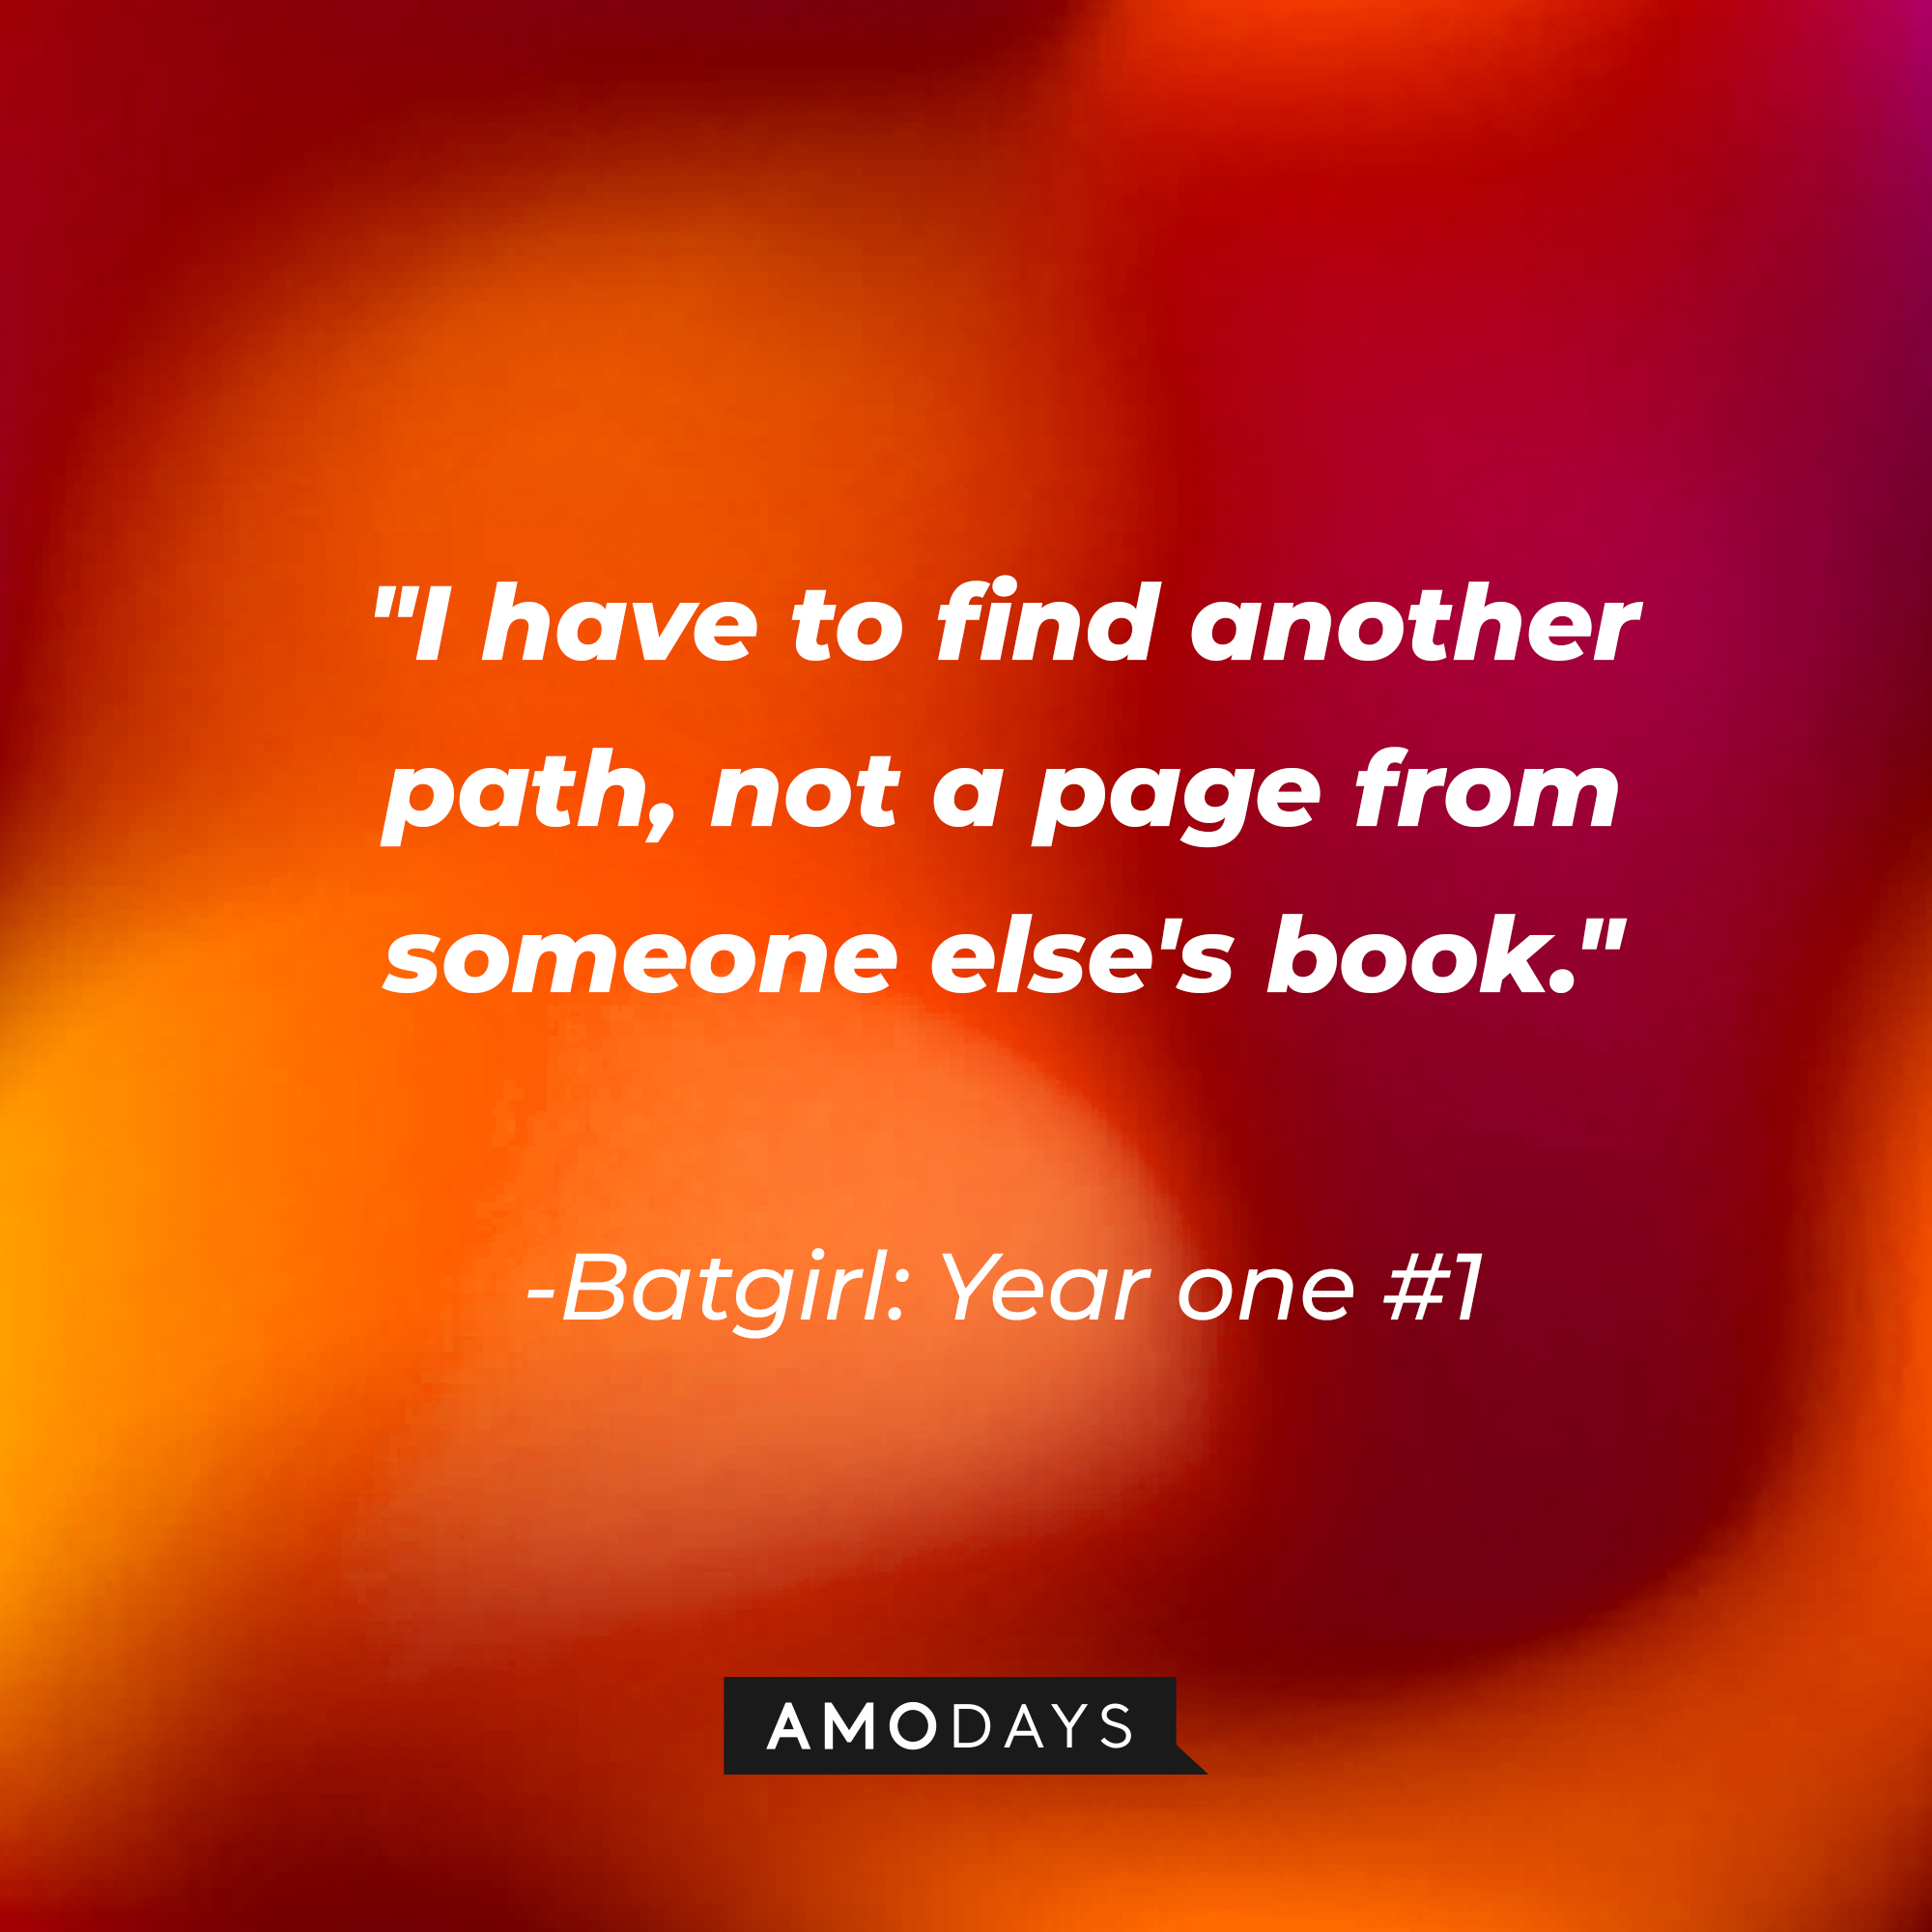 A quote from Batgirl: Year one #1: "I have to find another path, not a page from someone else's book." | Source: AmoDays